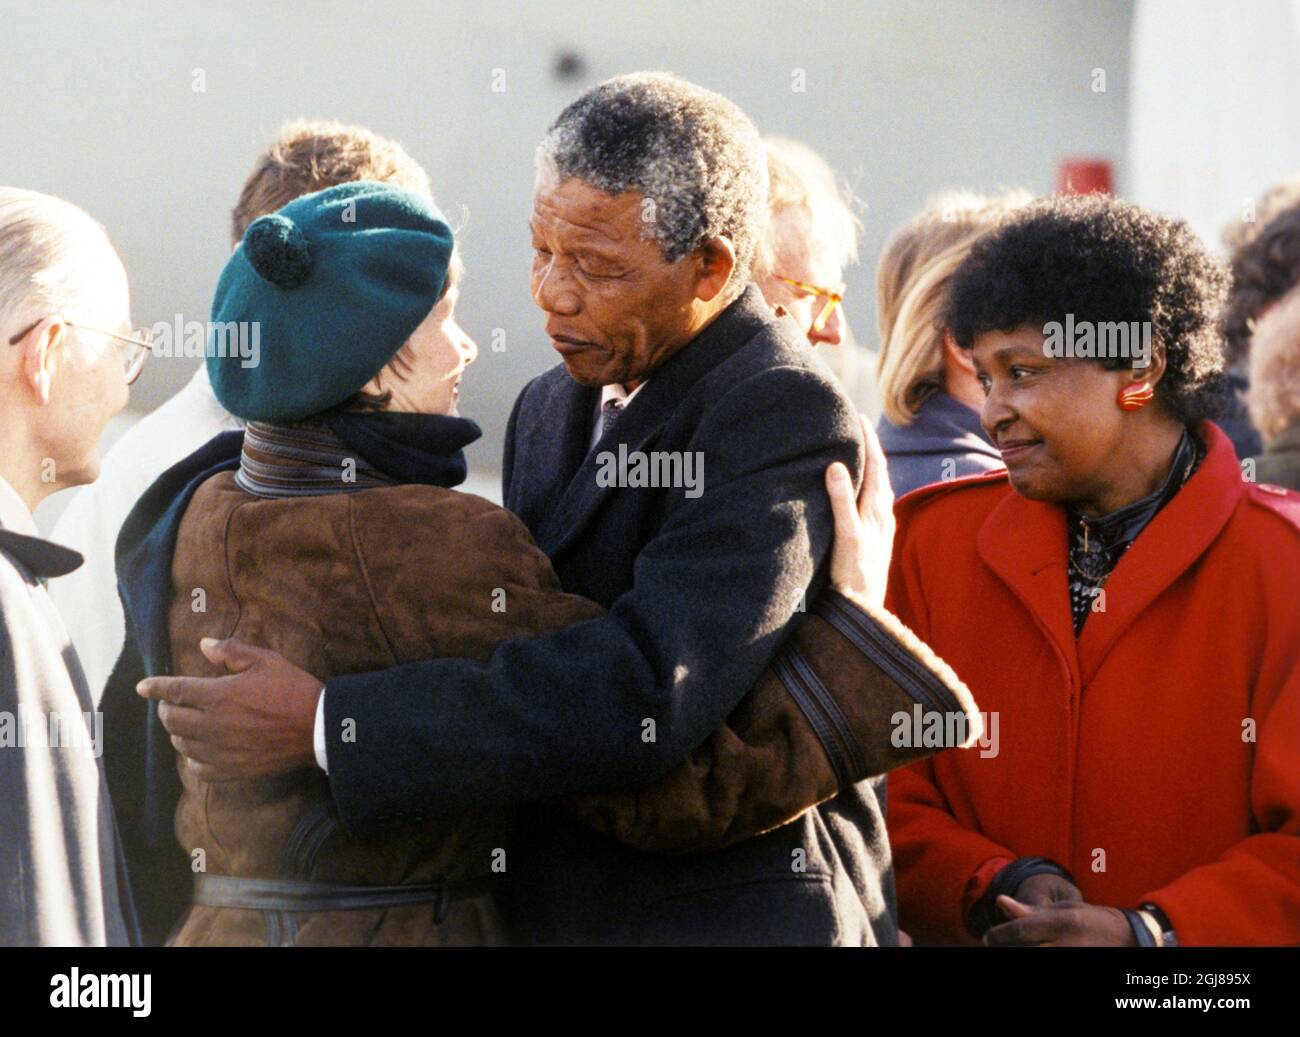 ARKIV 1990-03-12 *For your files* ANC- leader Nelson Mandela is seen hugging Lisbeth Palme, the widow of the late Swedish Prime Minister Olof Palme, during the arrival to Stockholm, Sweden, March 12, 1990. At righ Winnie Mandela Foto: Anders Holmstrom / SCANPIX / Kod: 1008  Stock Photo